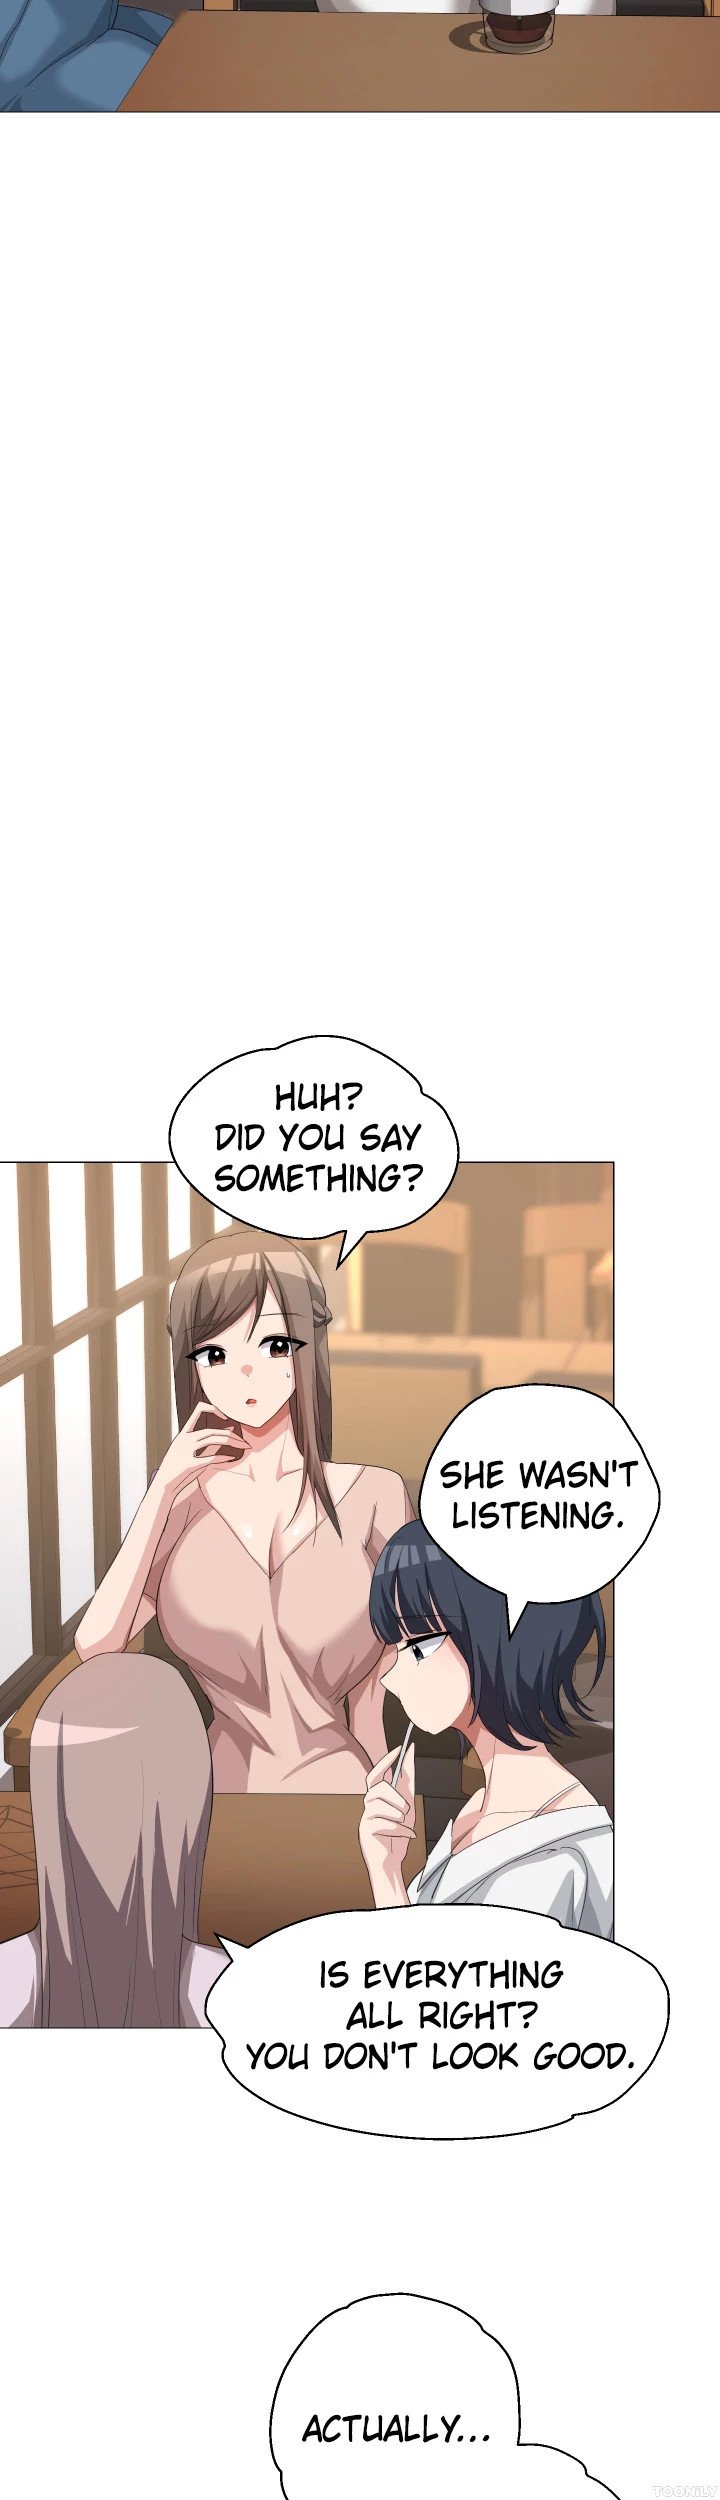 girls-i-used-to-teach-chap-8-16